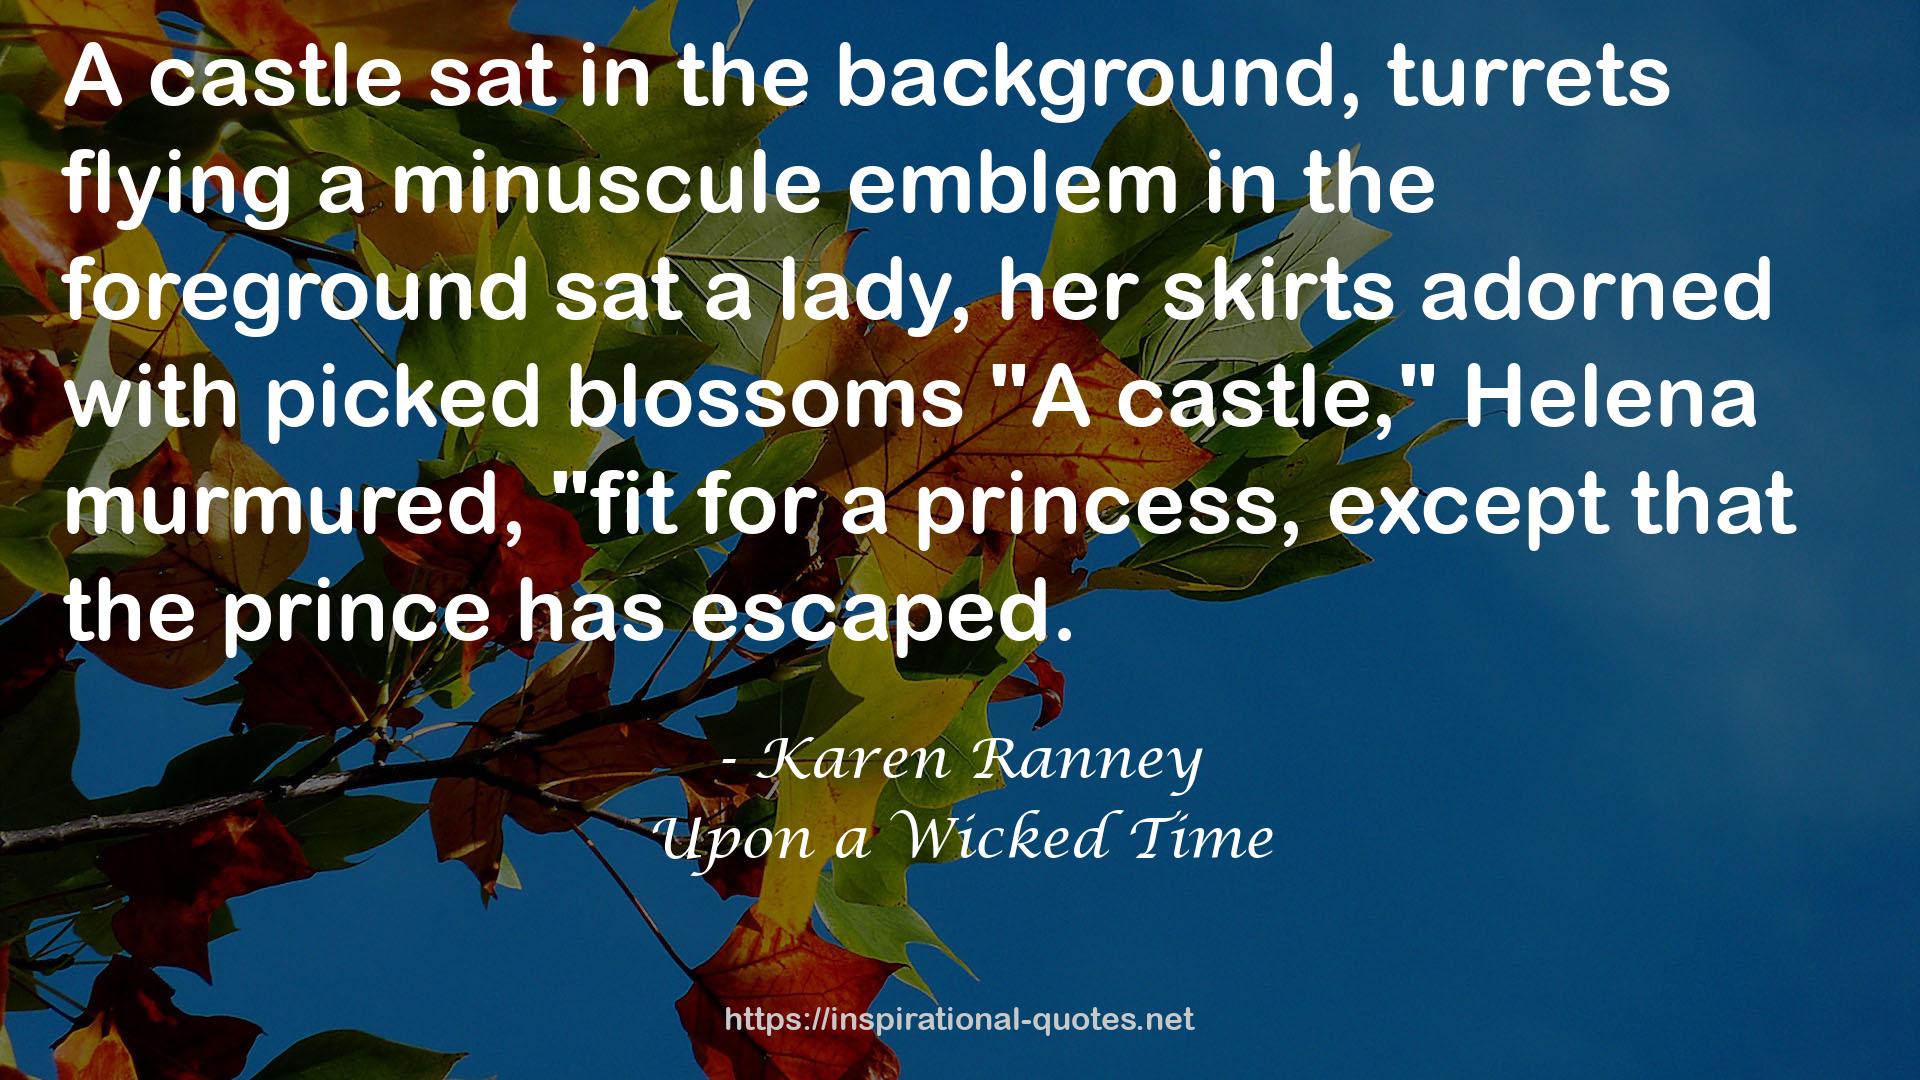 Upon a Wicked Time QUOTES